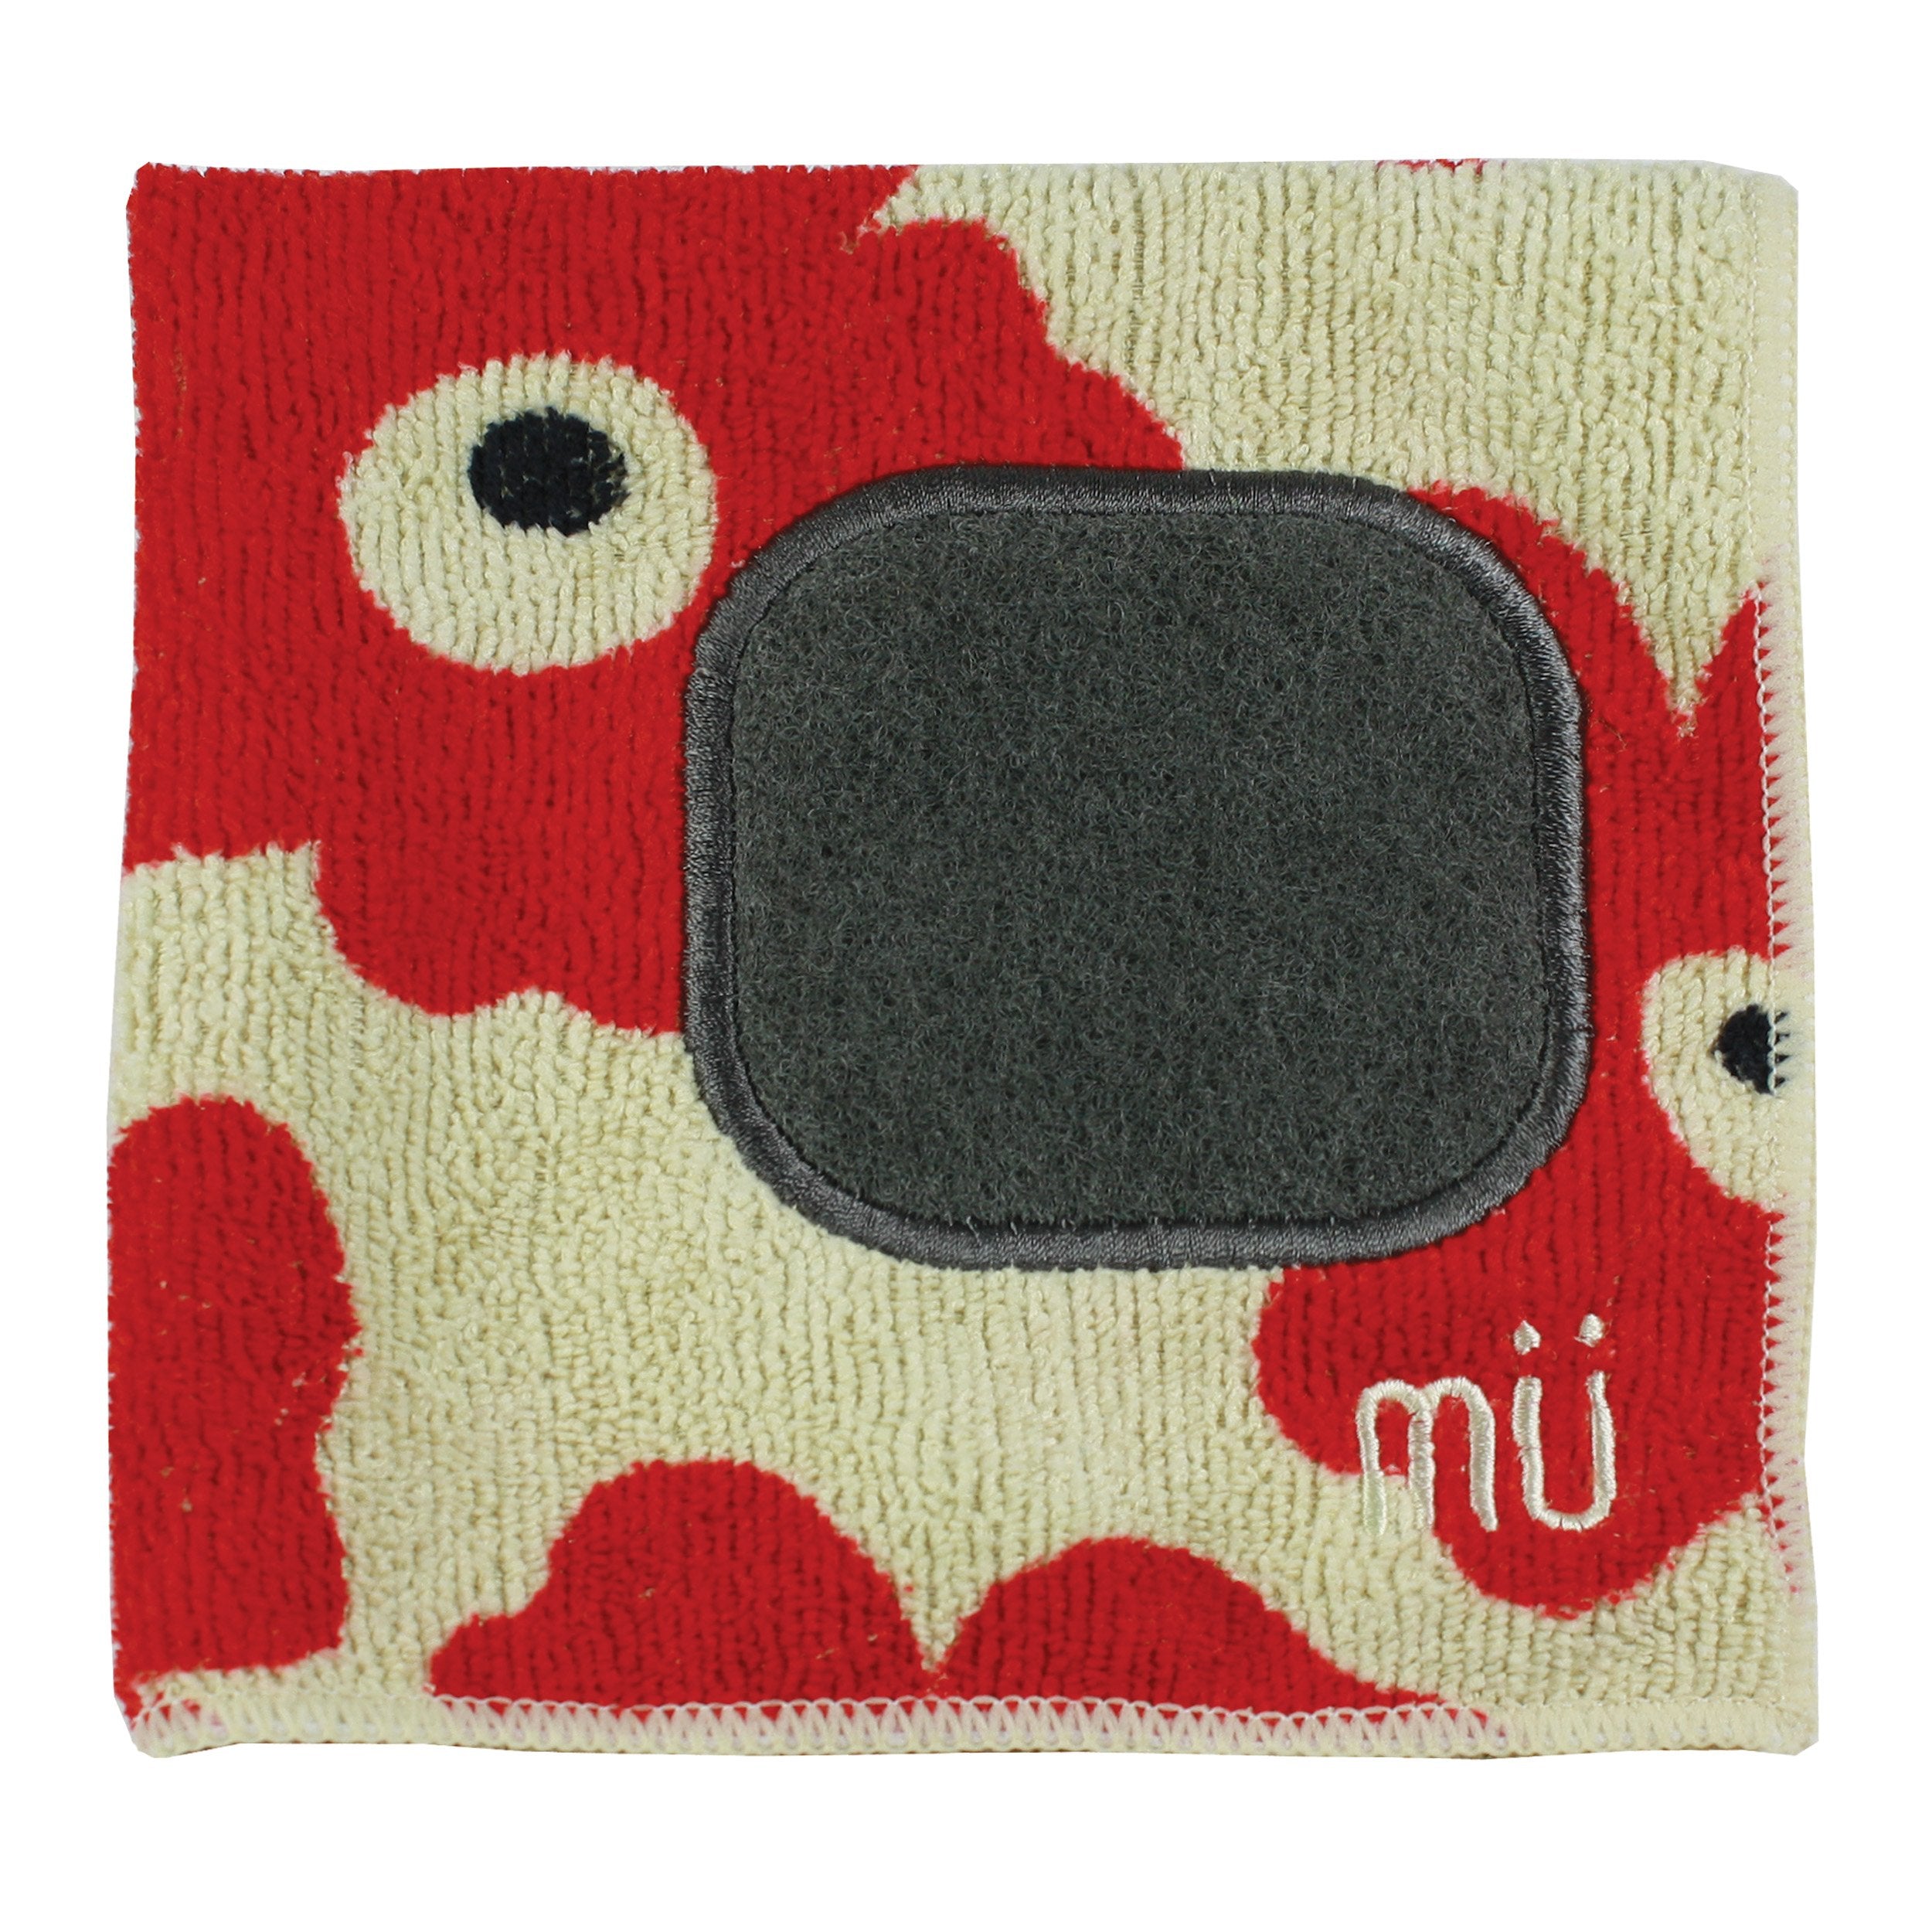 MUkitchen Microfiber Dishcloth With Built-In Scrubber, 12 by 12-Inches, Red Poppy